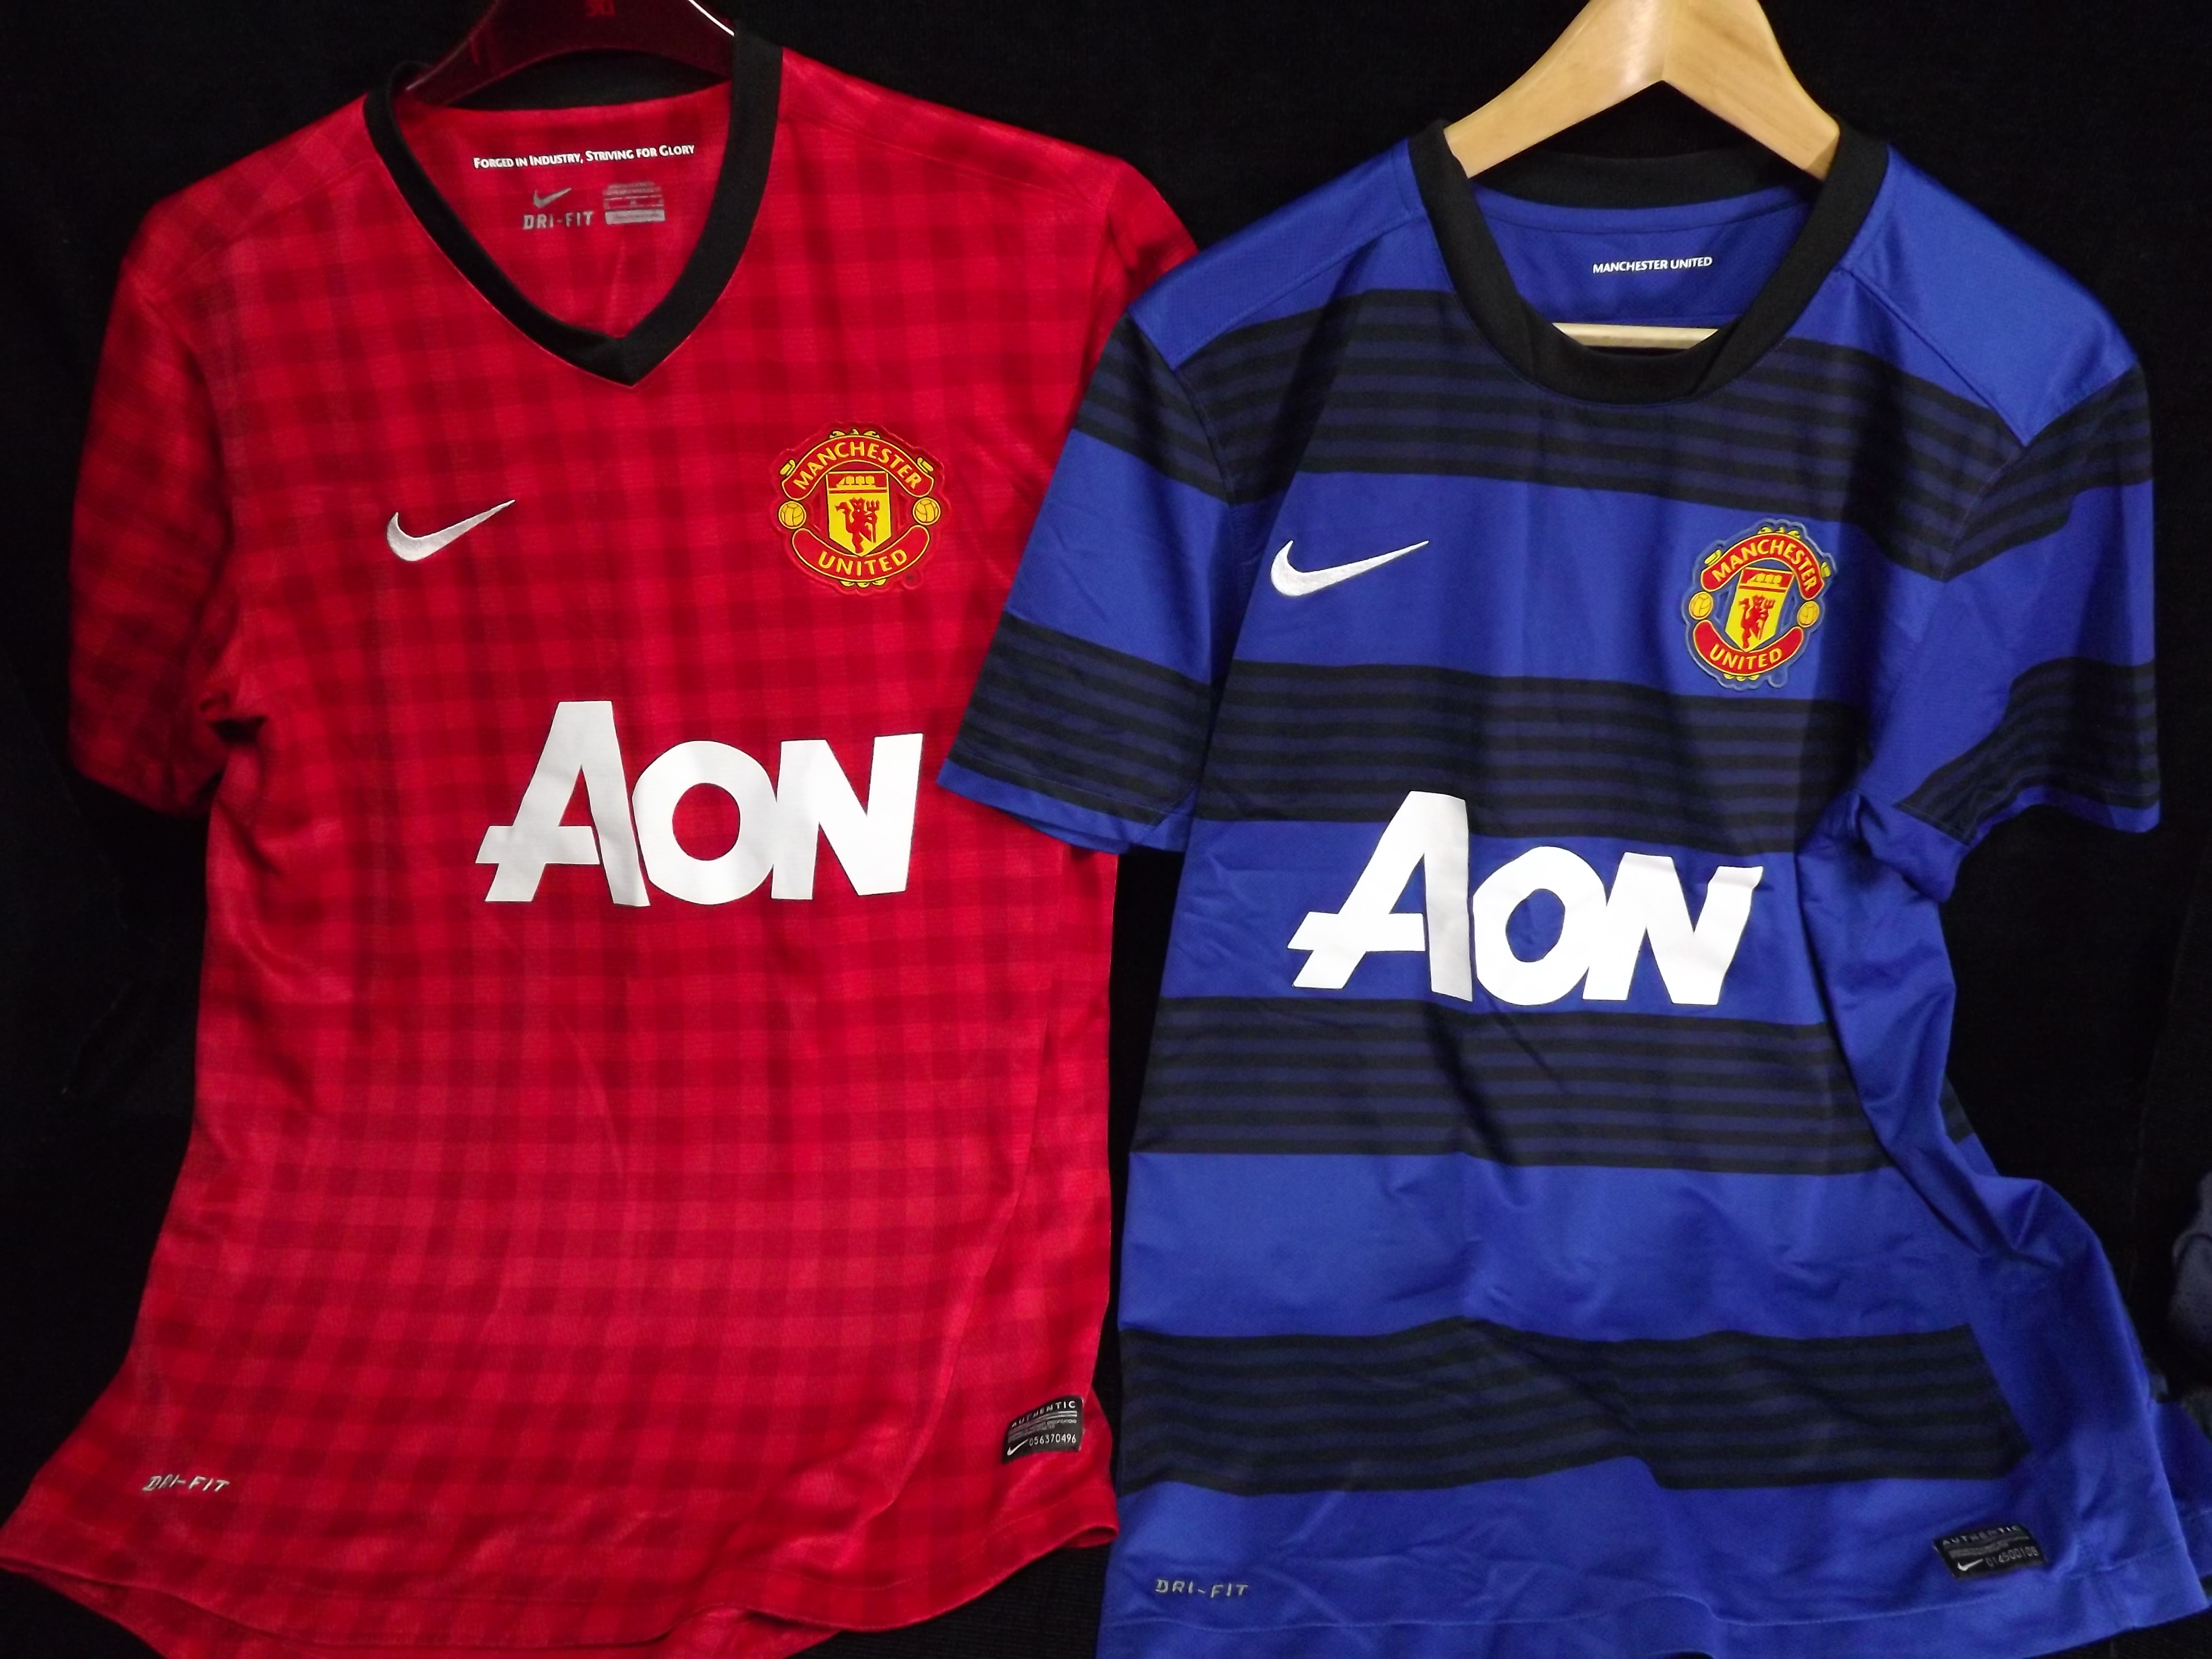 8 x Manchester United Football Shirts. Adidas Chevrolet. No.1 Home Goalkeeper Long Sleeve Shirt in - Image 4 of 9